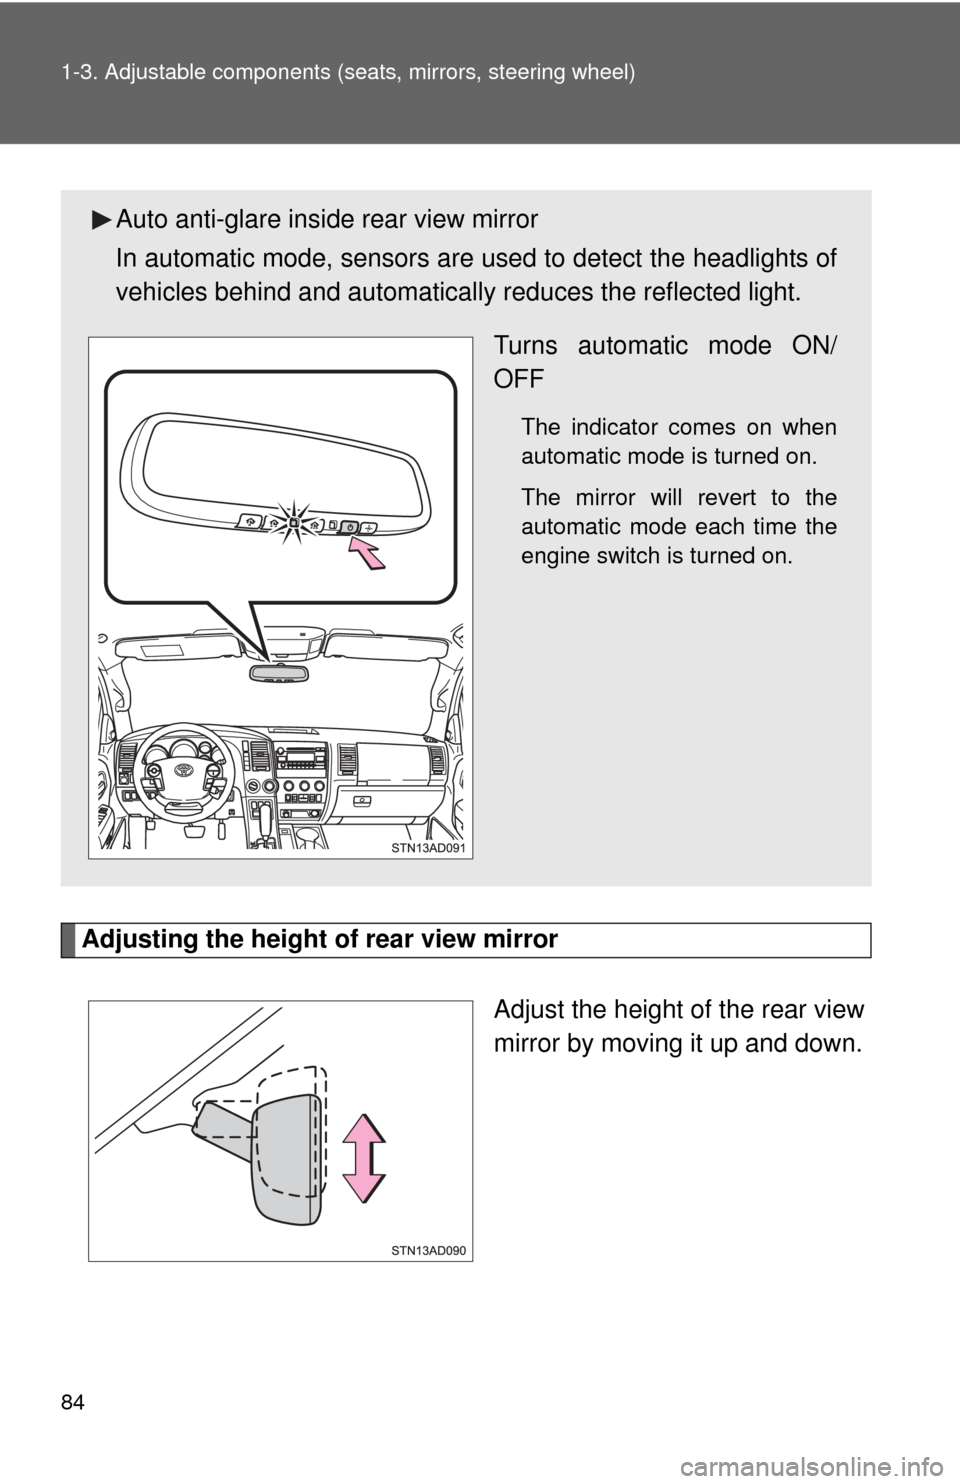 TOYOTA SEQUOIA 2011 2.G User Guide 84 1-3. Adjustable components (seats, mirrors, steering wheel)
Adjusting the height of rear view mirror
Adjust the height of the rear view
mirror by moving it up and down.
Auto anti-glare inside rear 